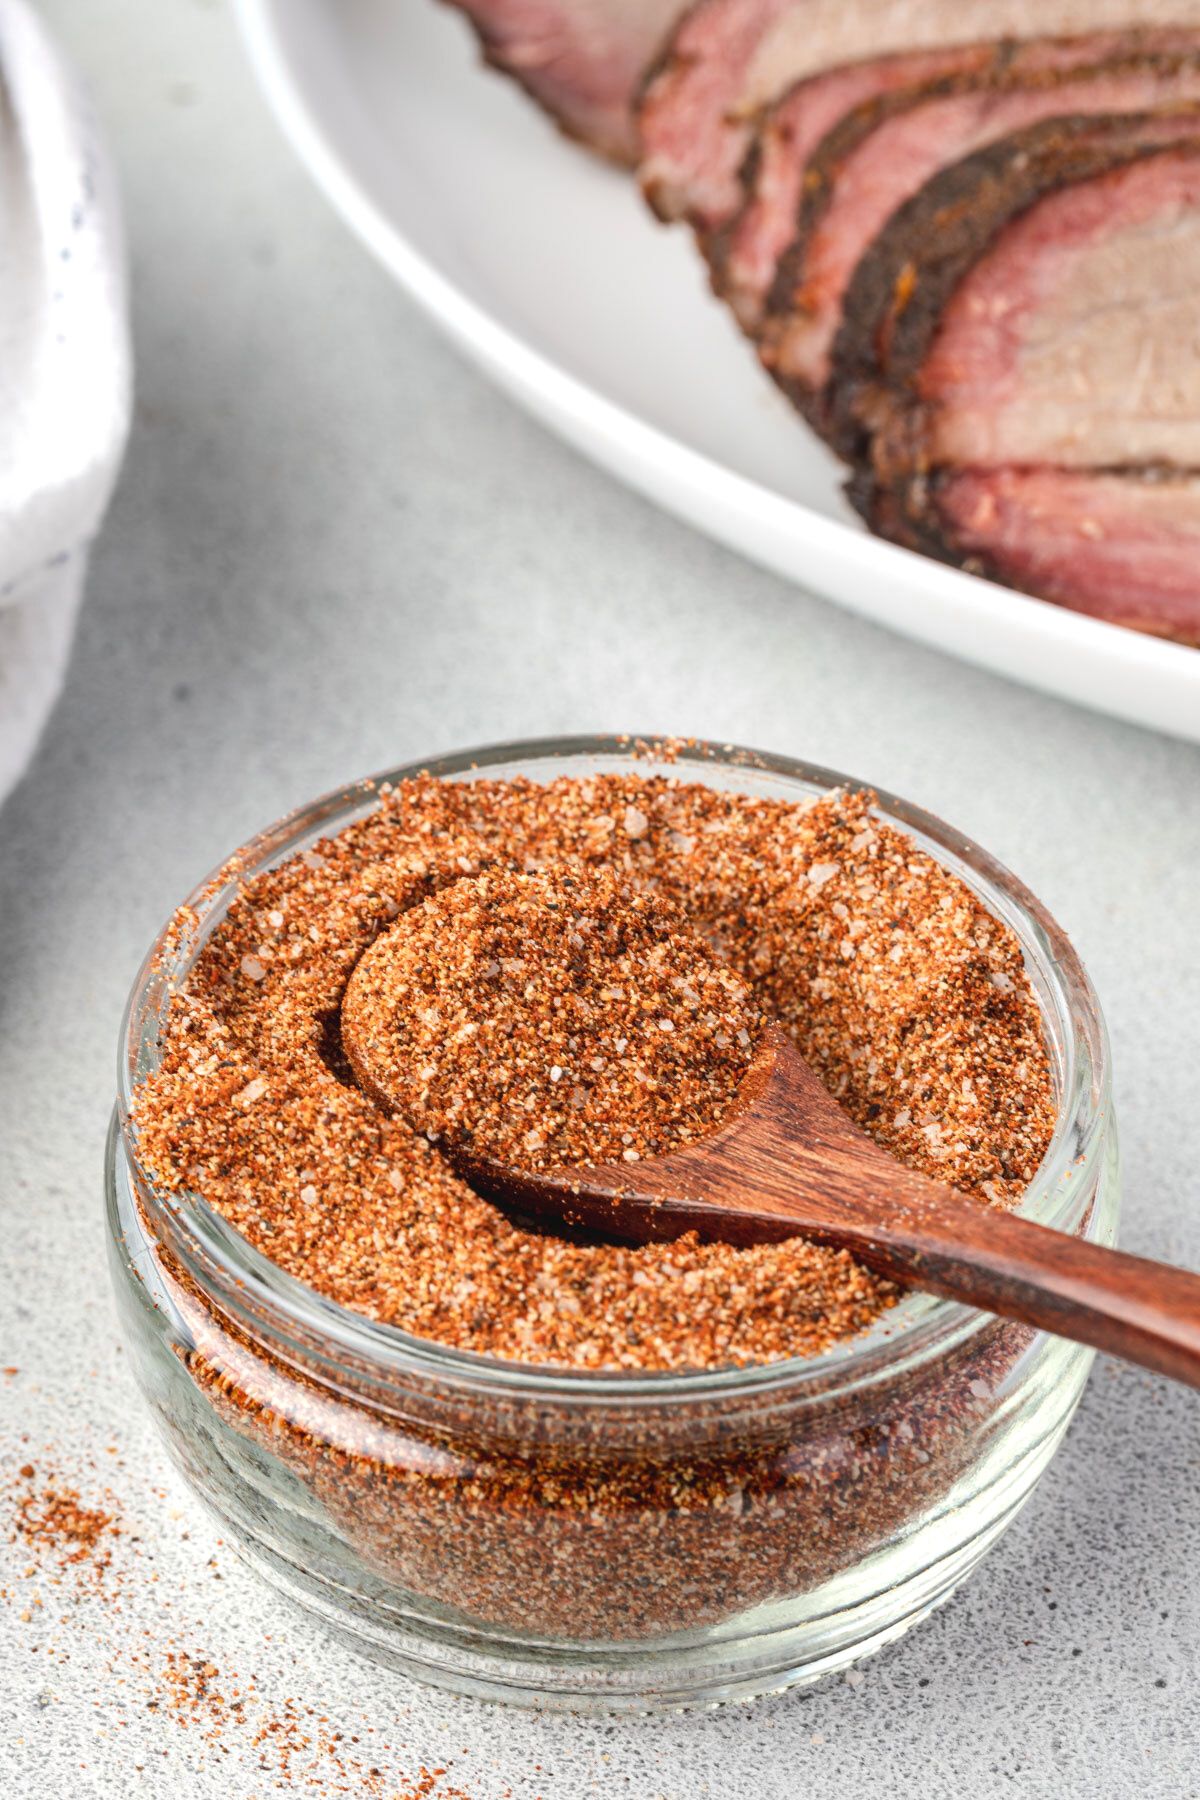 Shallow jar of spice mix with wooden spoon scooping spices and a platter of sliced brisket in background.